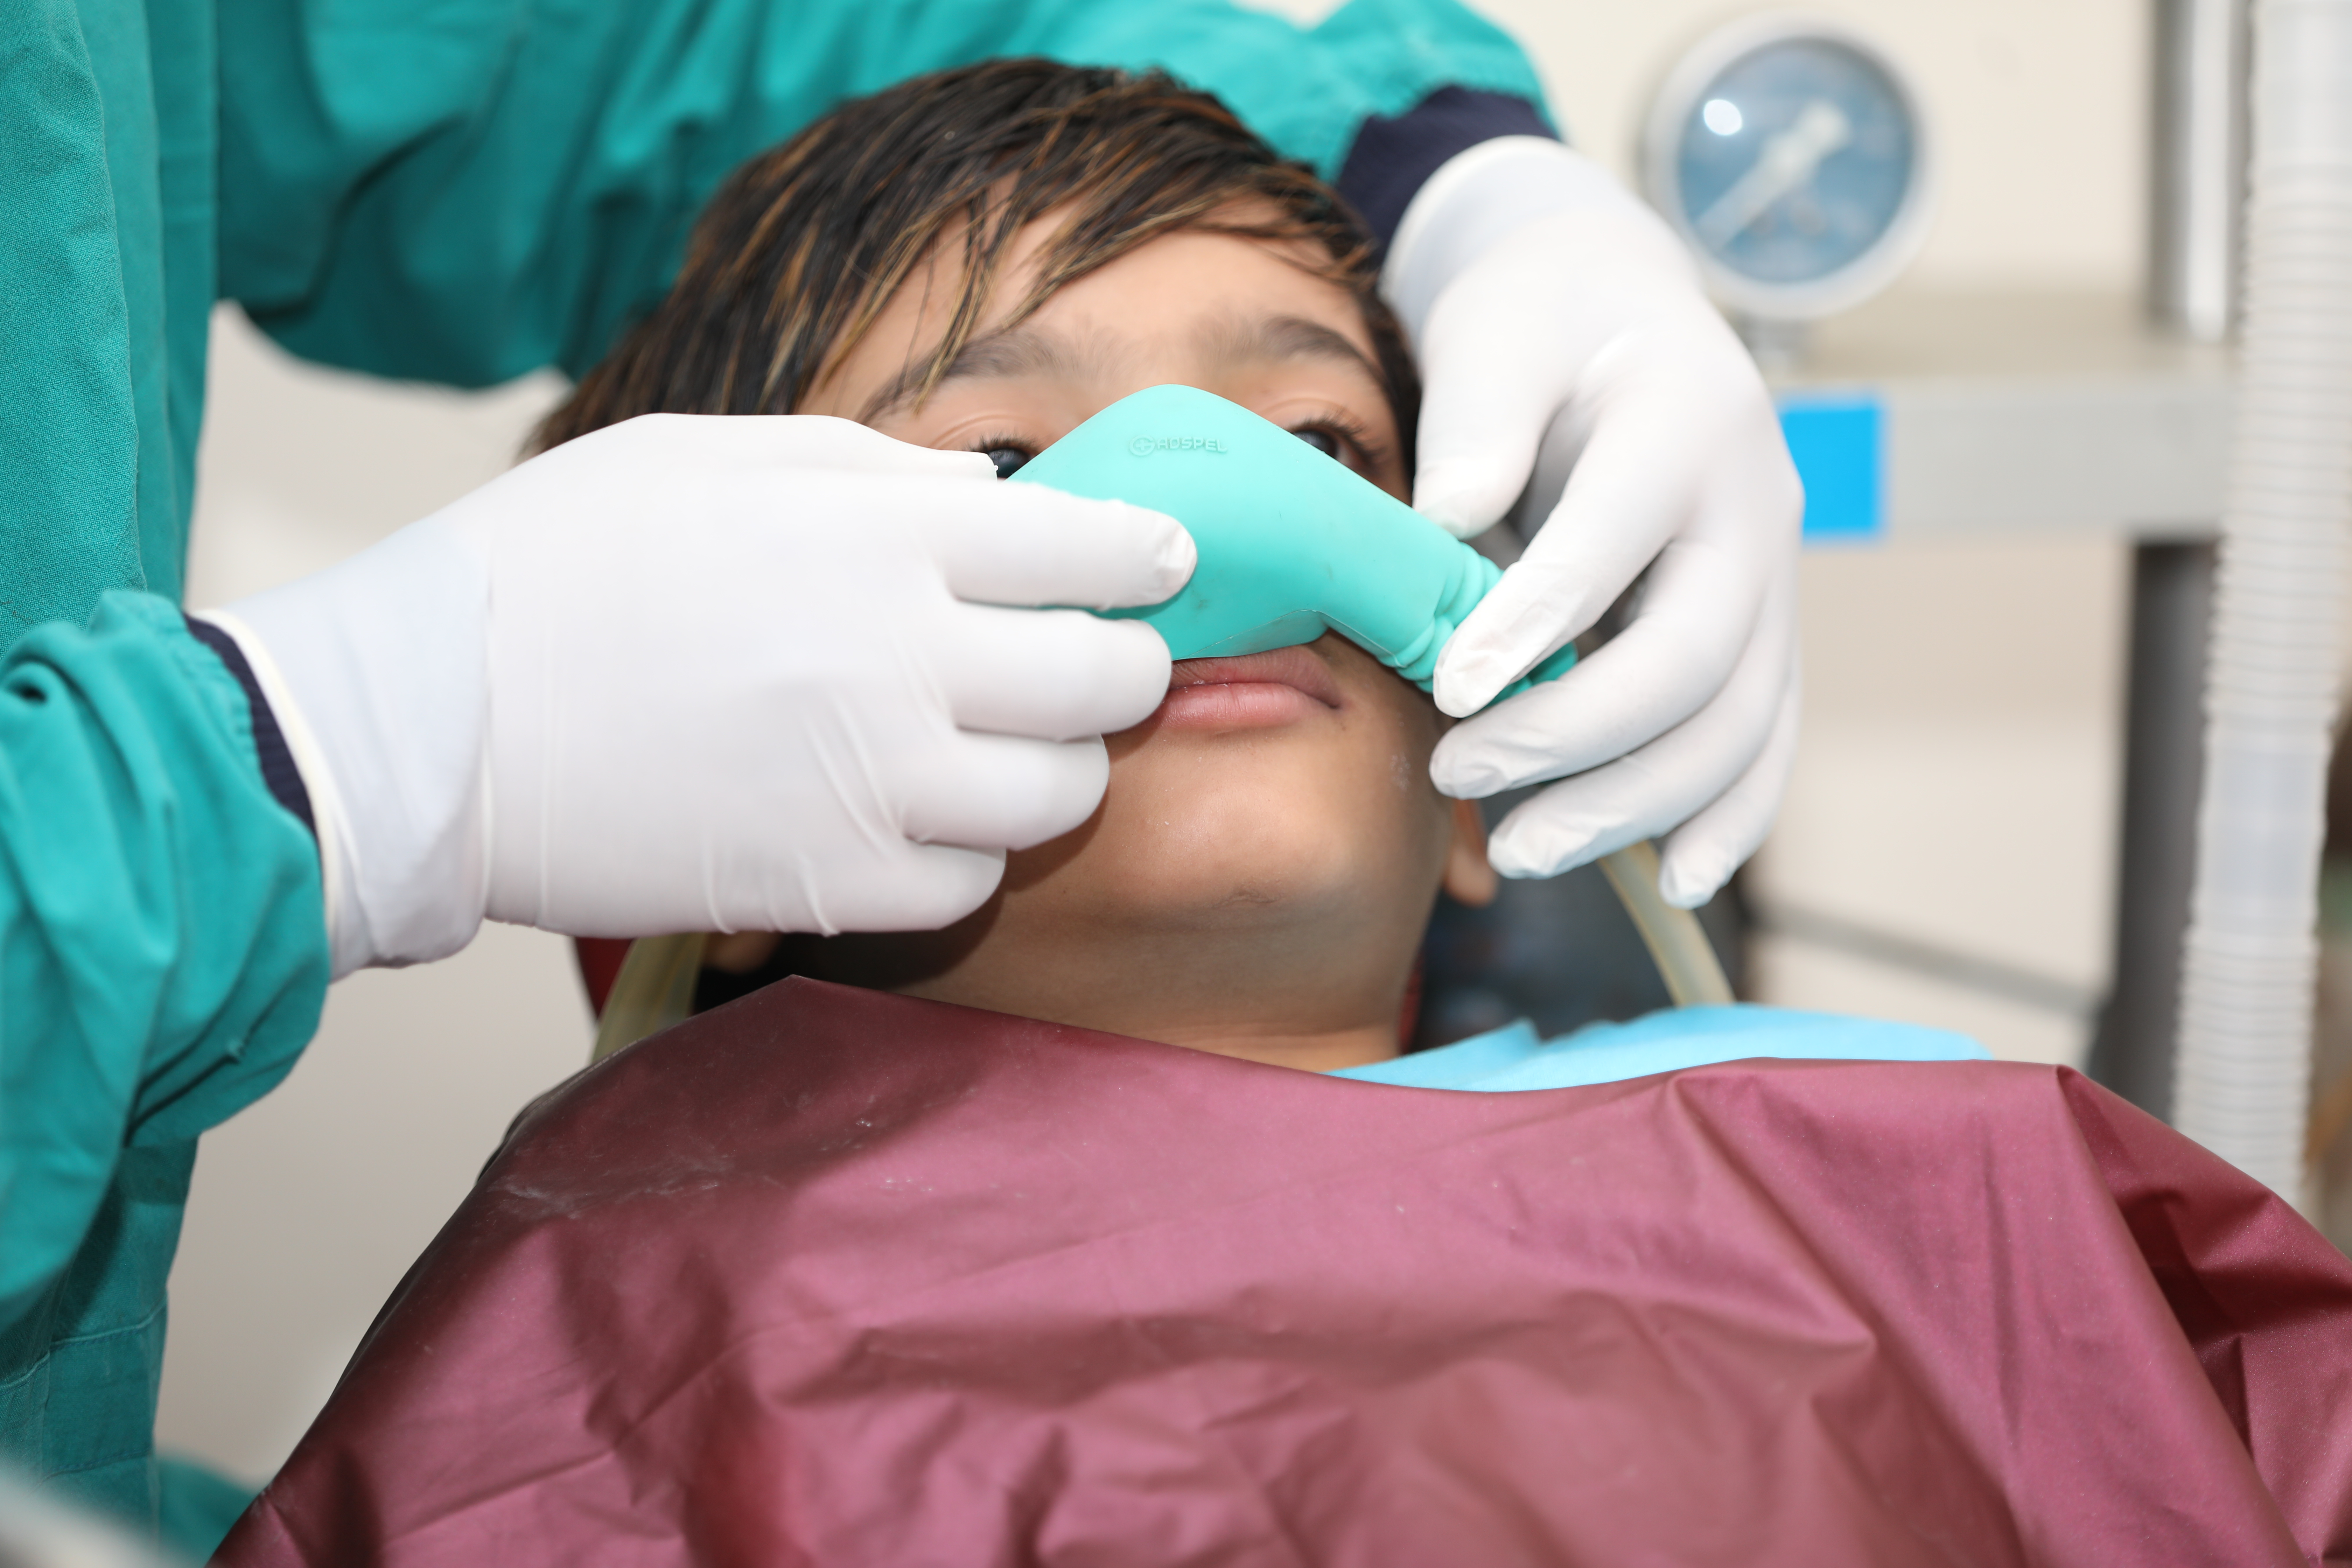 Treatment under laughing gas sedation